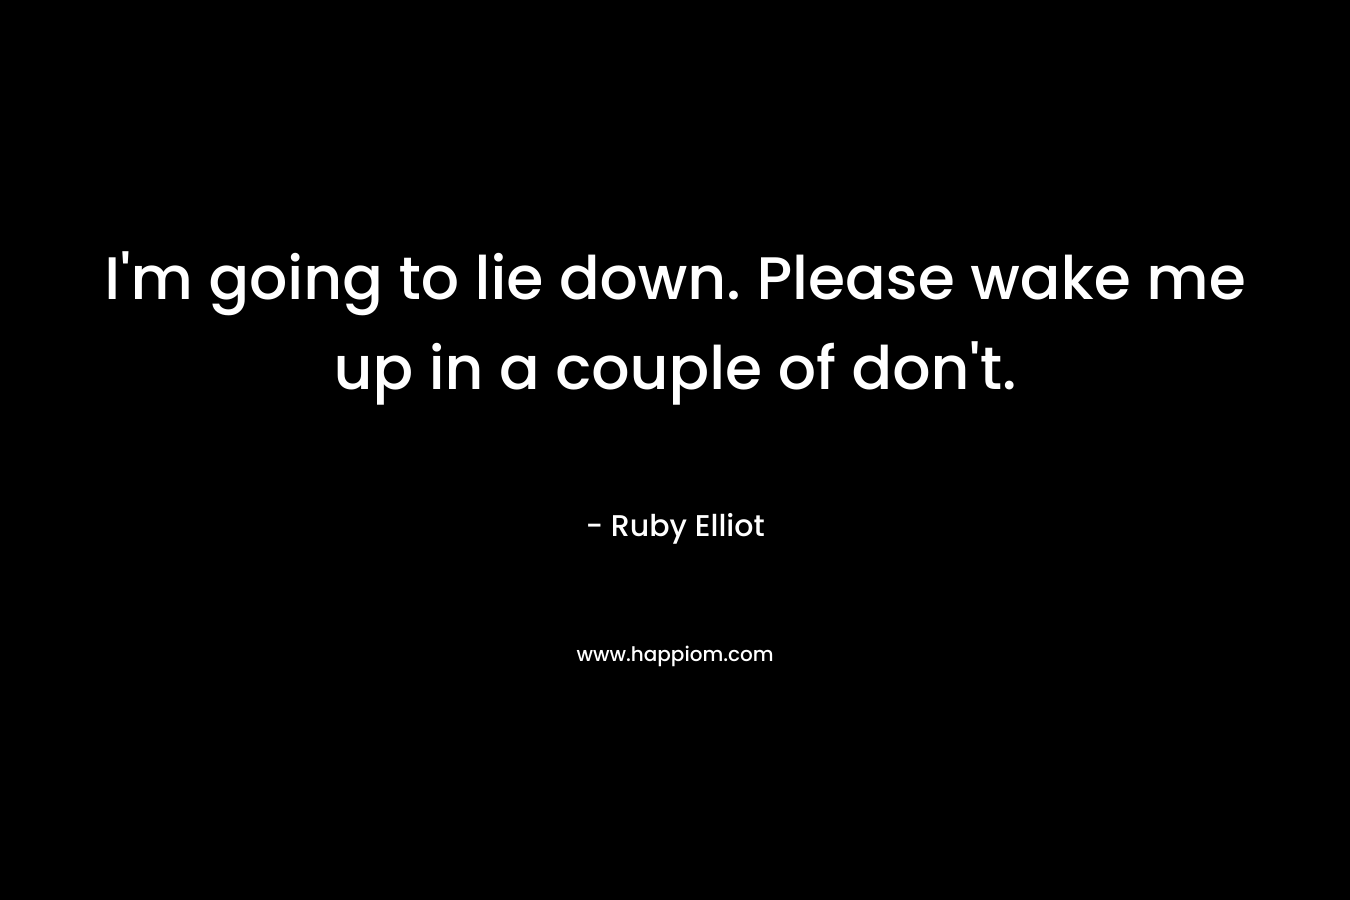 I’m going to lie down. Please wake me up in a couple of don’t. – Ruby Elliot